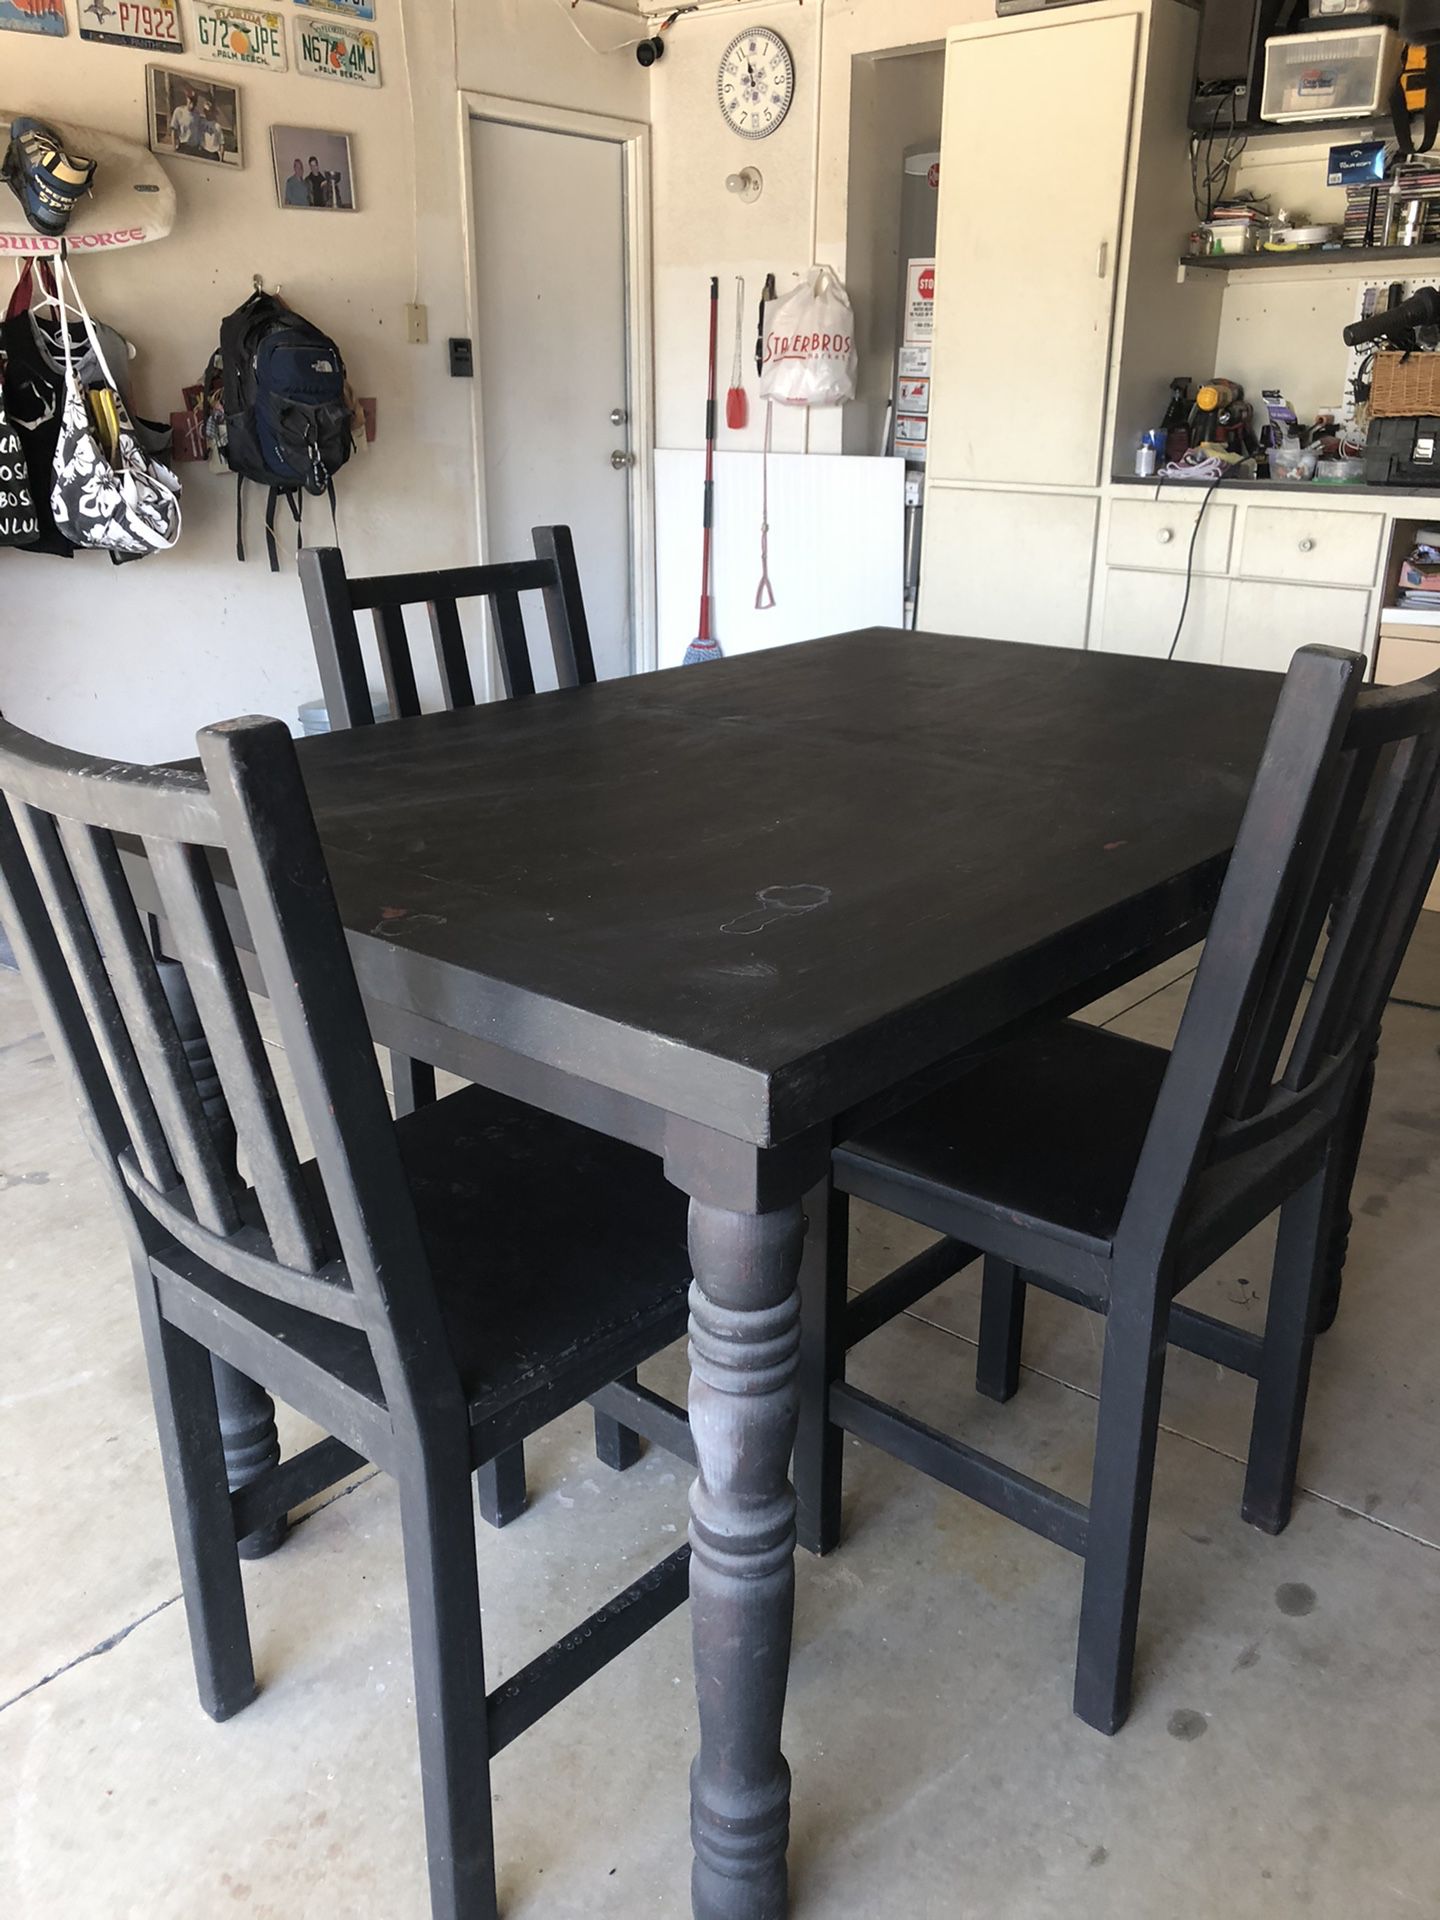 Kitchen table - all wood. With 4 chairs